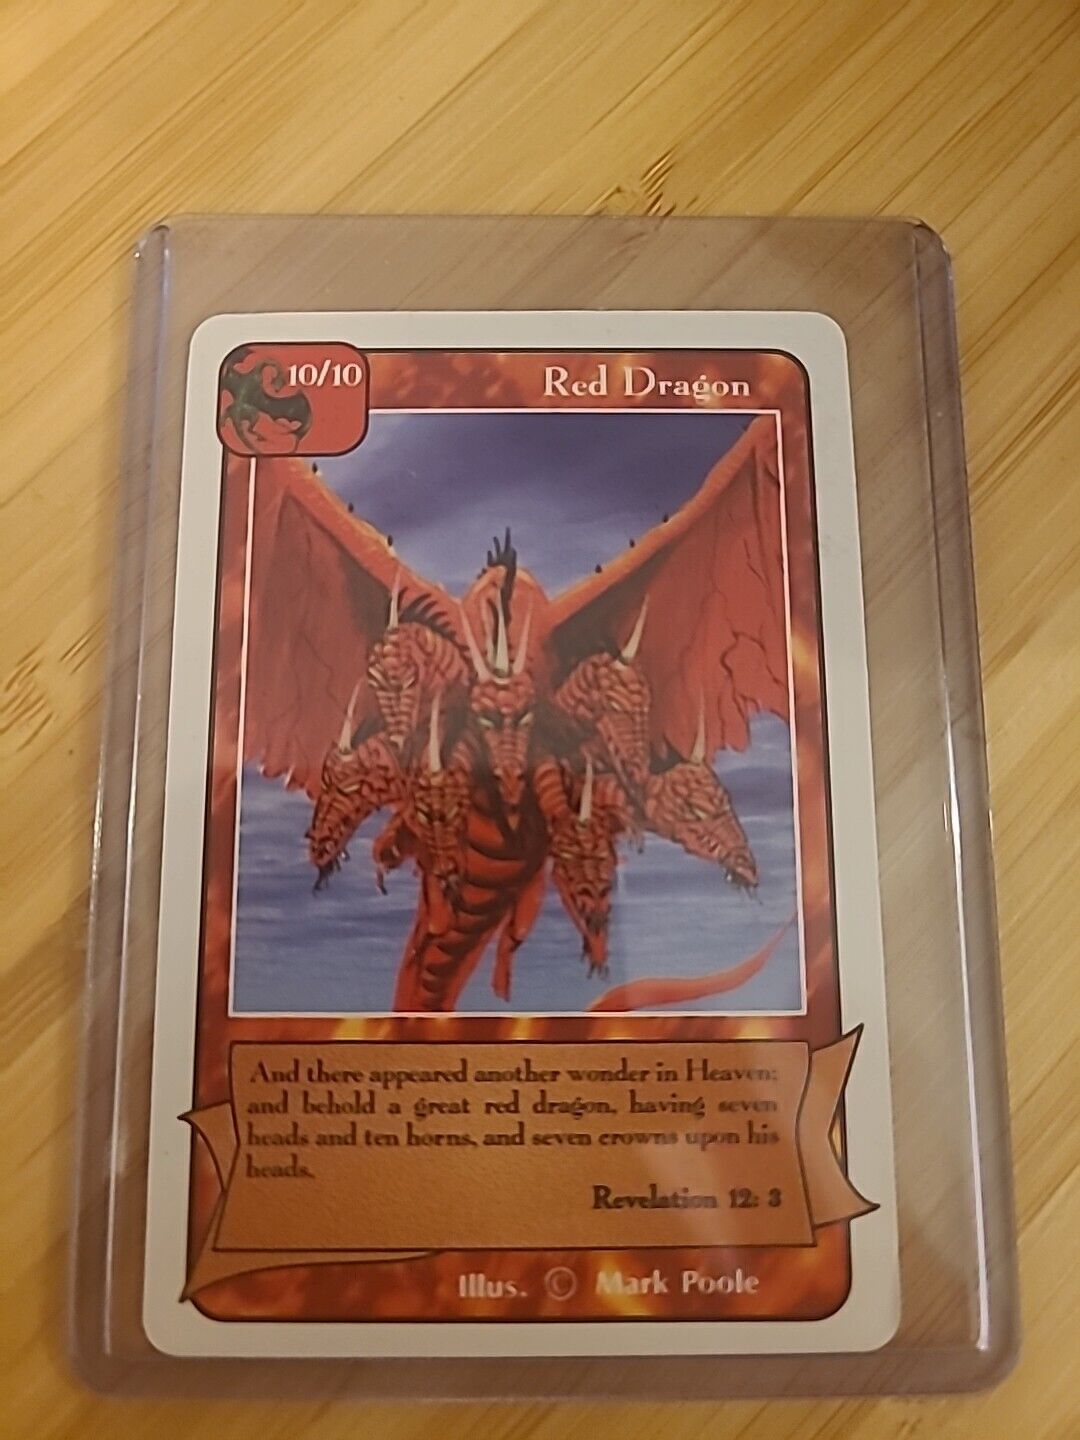 ⭐️ 1996 Redemption Rare Red Dragon 10/10 Christian Trading Card Bible Game.